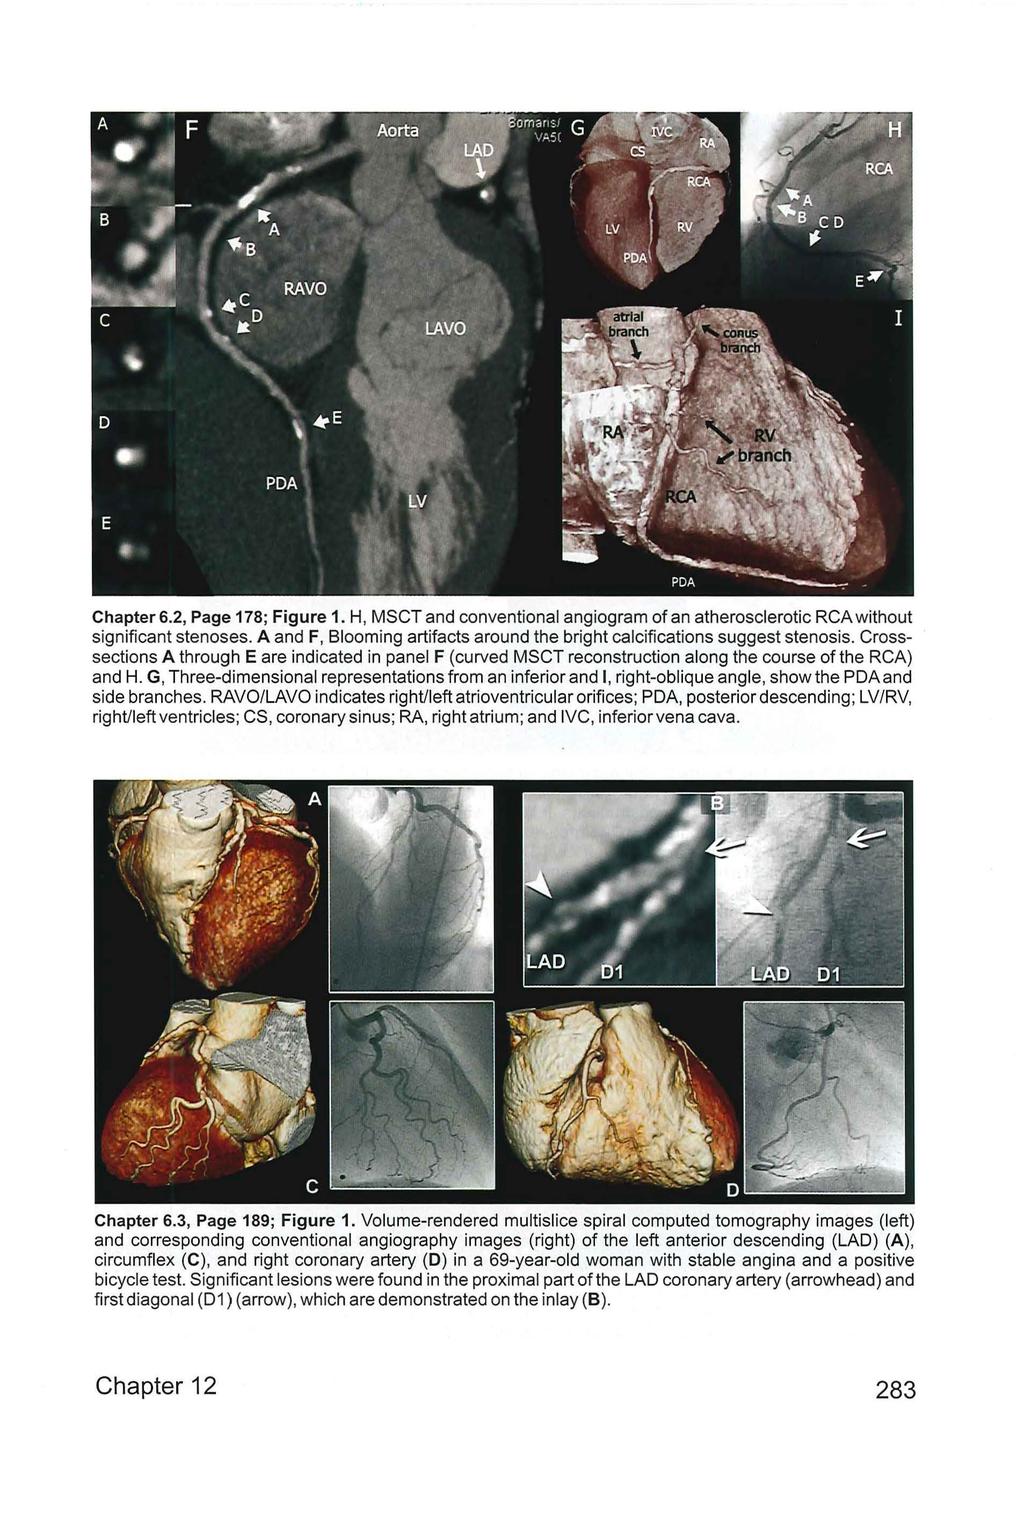 Chapter 6.2, Page 178; Figure 1. H, MSCT and conventional angiogram of an atherosclerotic RCA without significant stenoses.